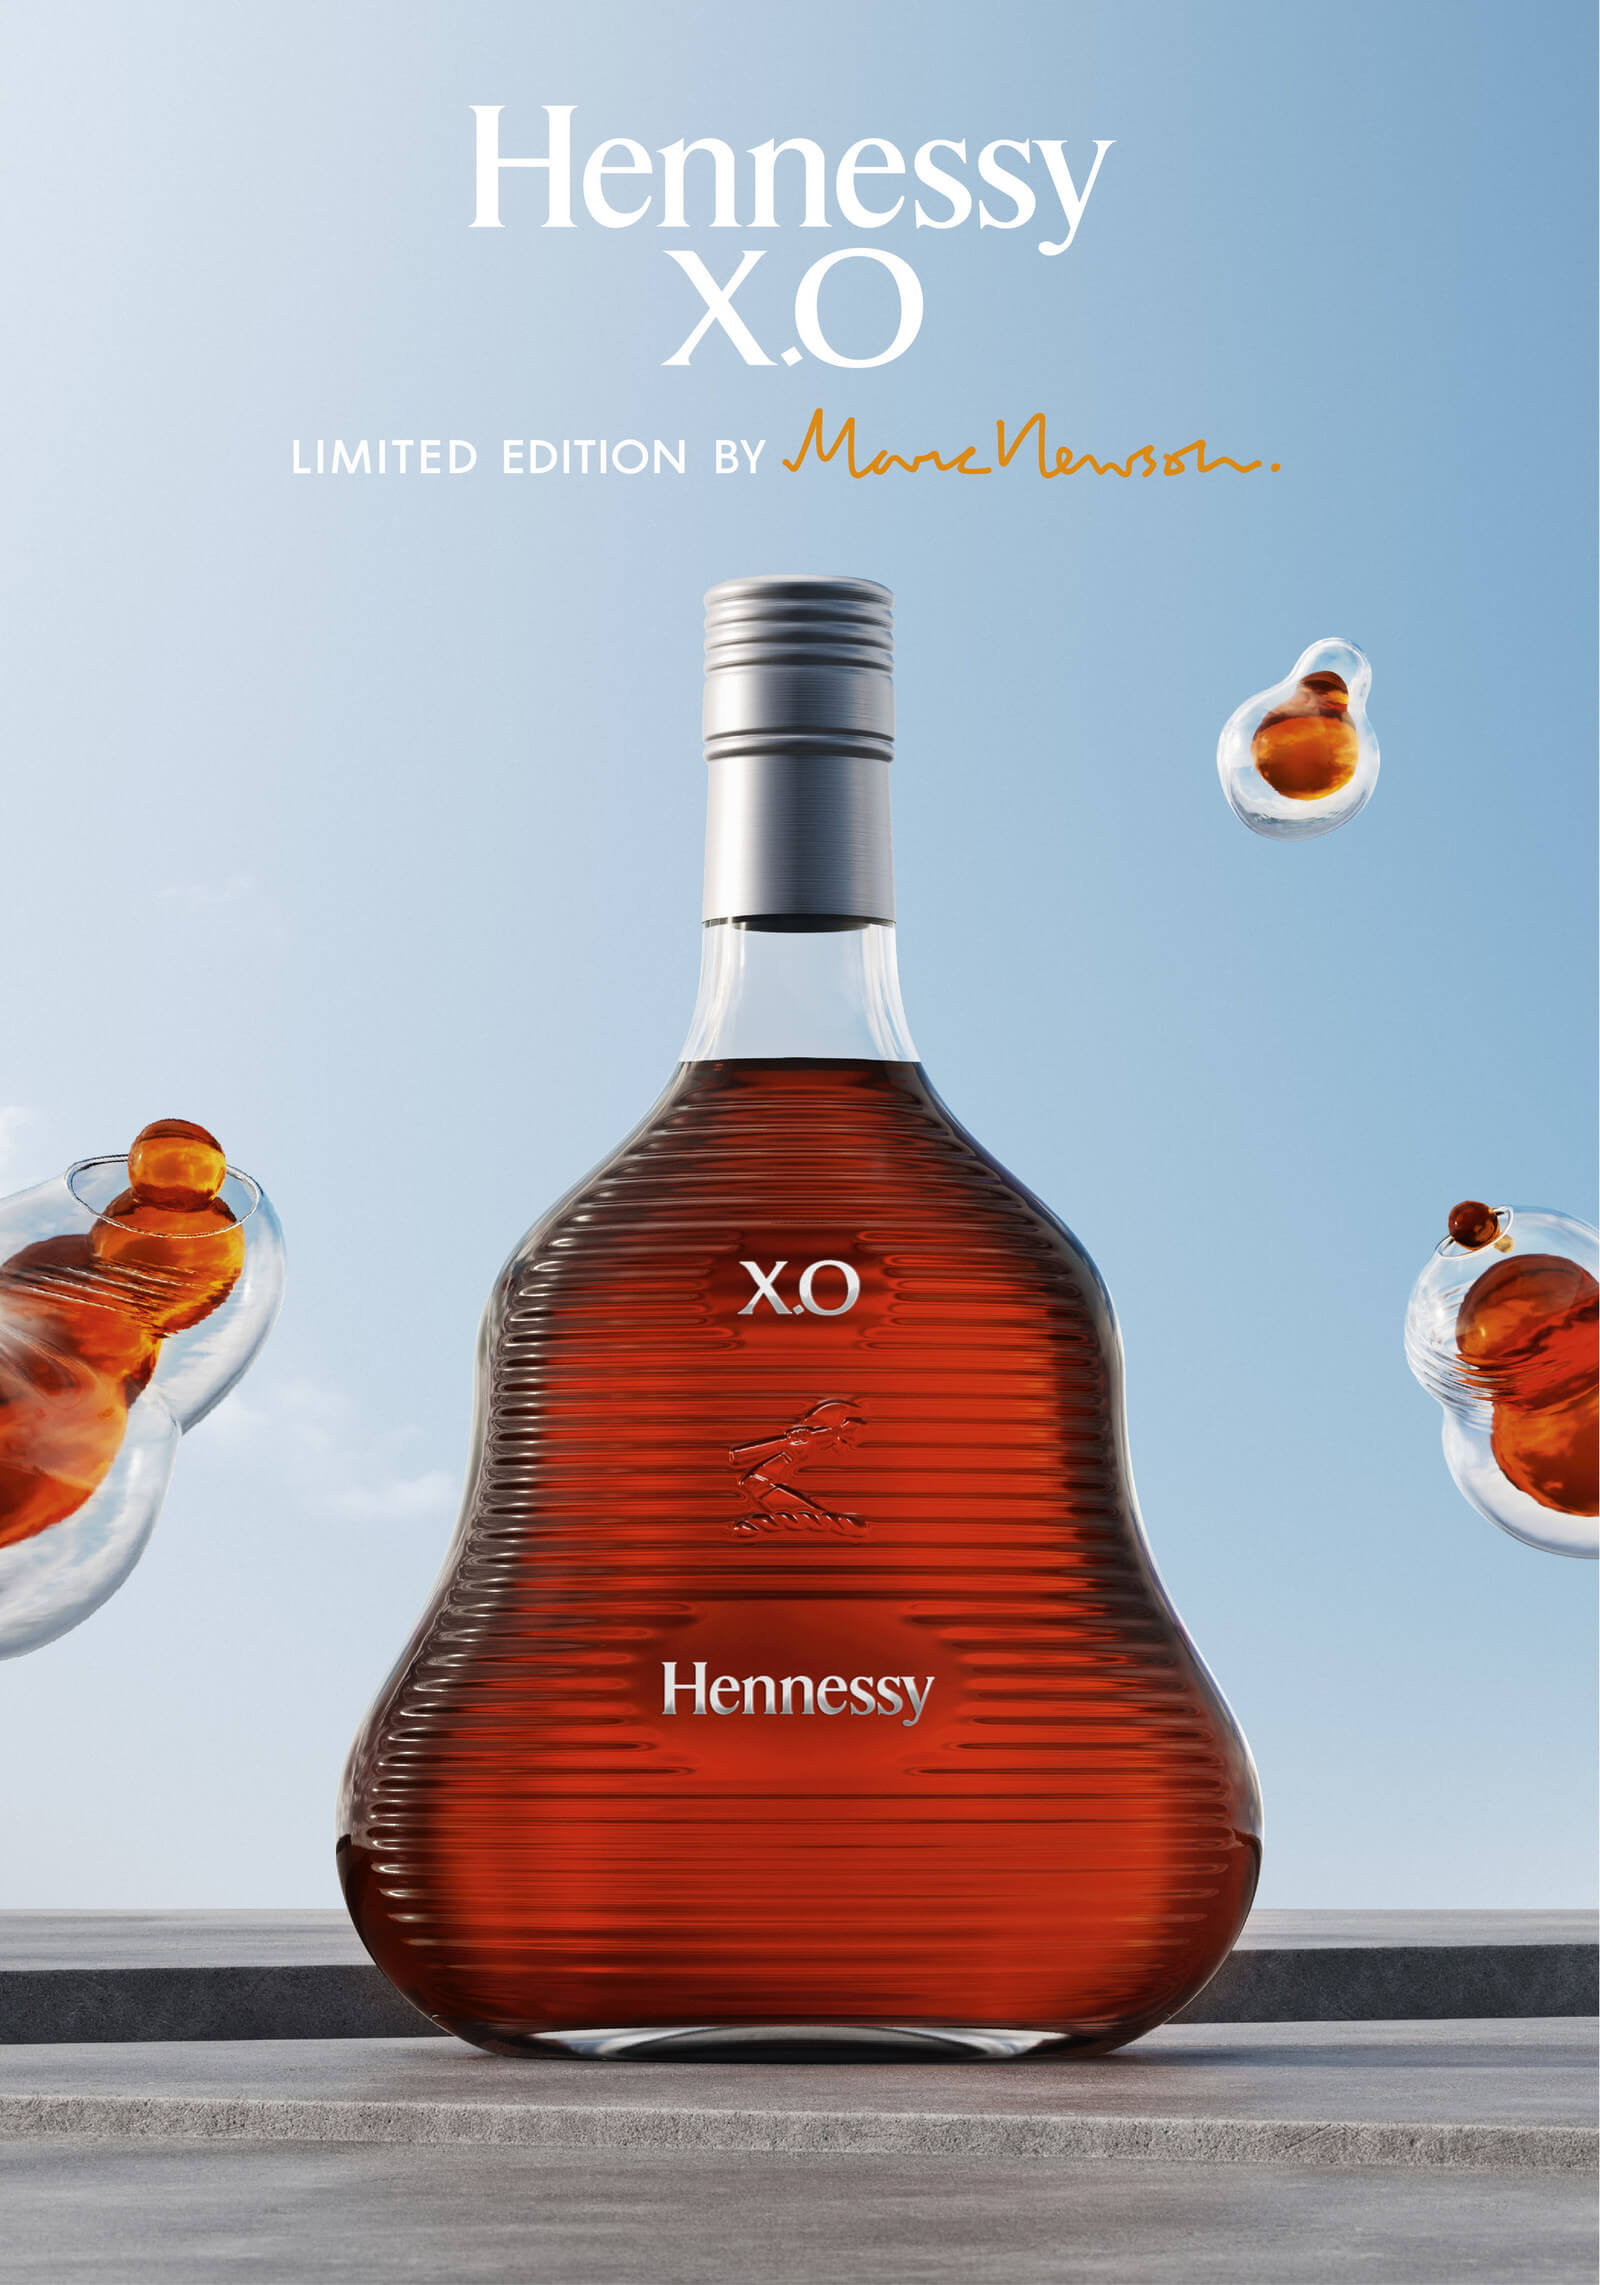 Hennessy XO 2017 limited edition bottle by Marc Newson